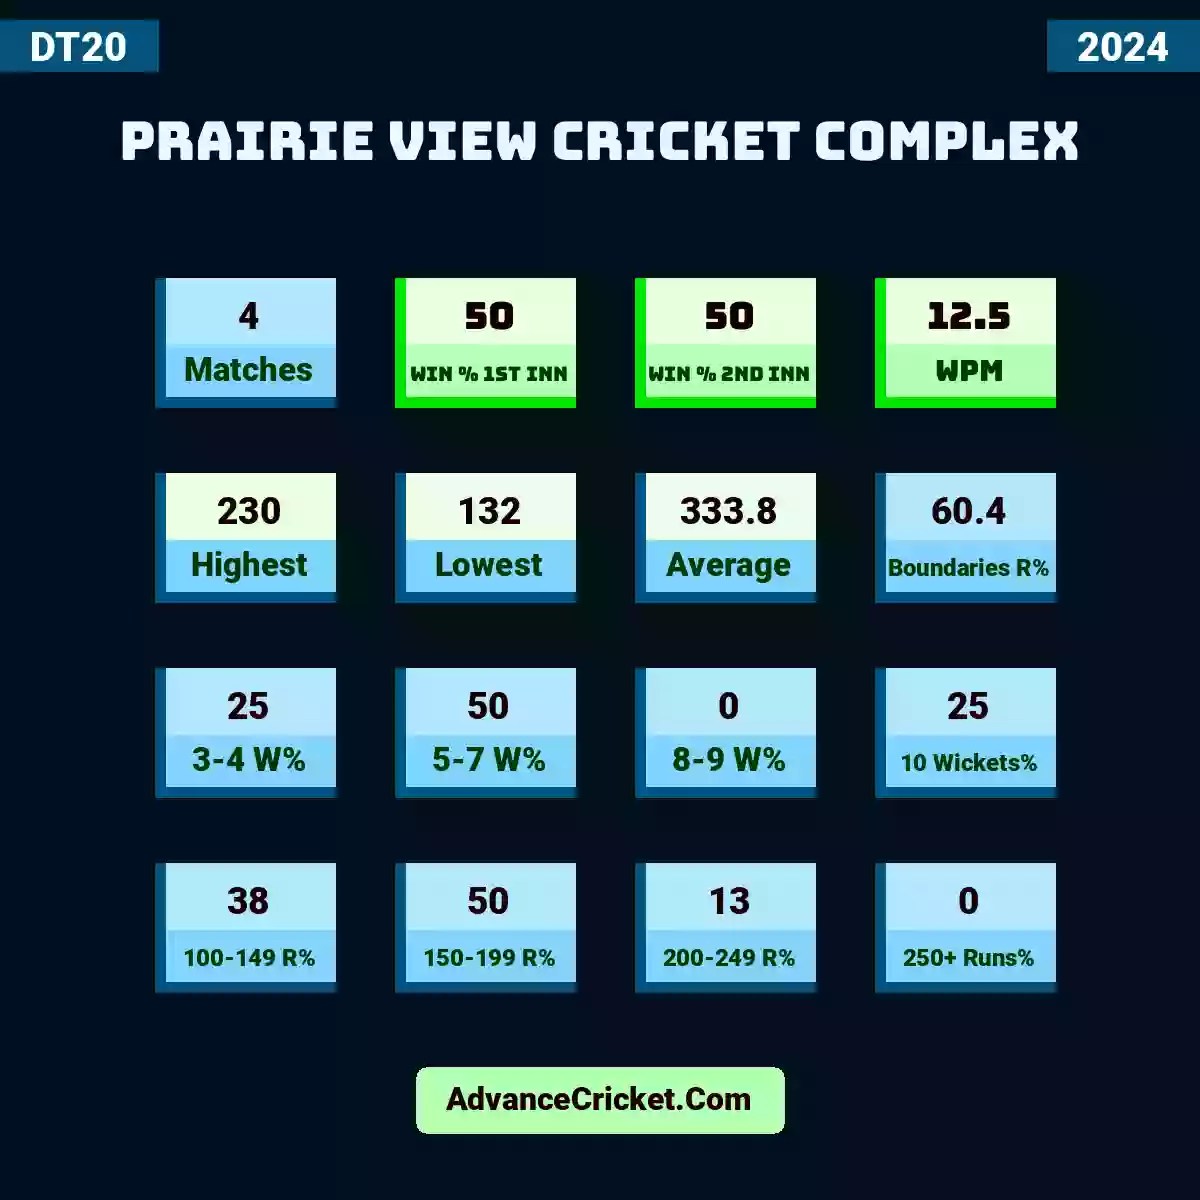 Image showing Prairie View Cricket Complex DT20 2024 with Matches: 4, Win % 1st Inn: 50, Win % 2nd Inn: 50, WPM: 12.5, Highest: 230, Lowest: 132, Average: 333.8, Boundaries R%: 60.4, 3-4 W%: 25, 5-7 W%: 50, 8-9 W%: 0, 10 Wickets%: 25, 100-149 R%: 38, 150-199 R%: 50, 200-249 R%: 13, 250+ Runs%: 0.